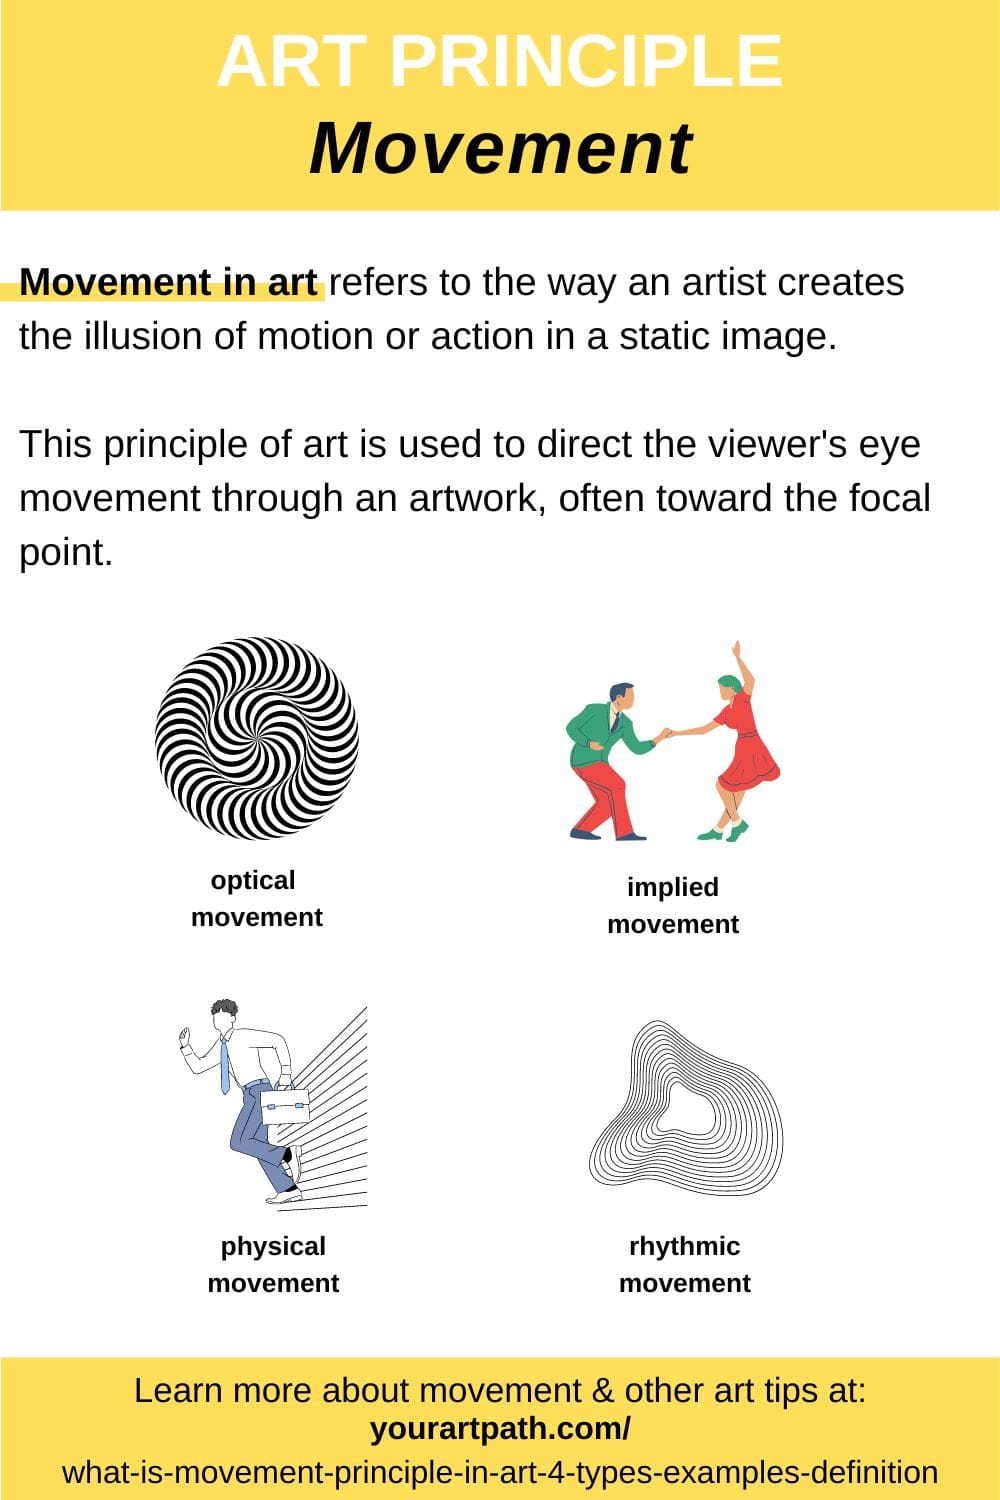 what-is-movement-principle-in-art-4-types-examples-and-definition